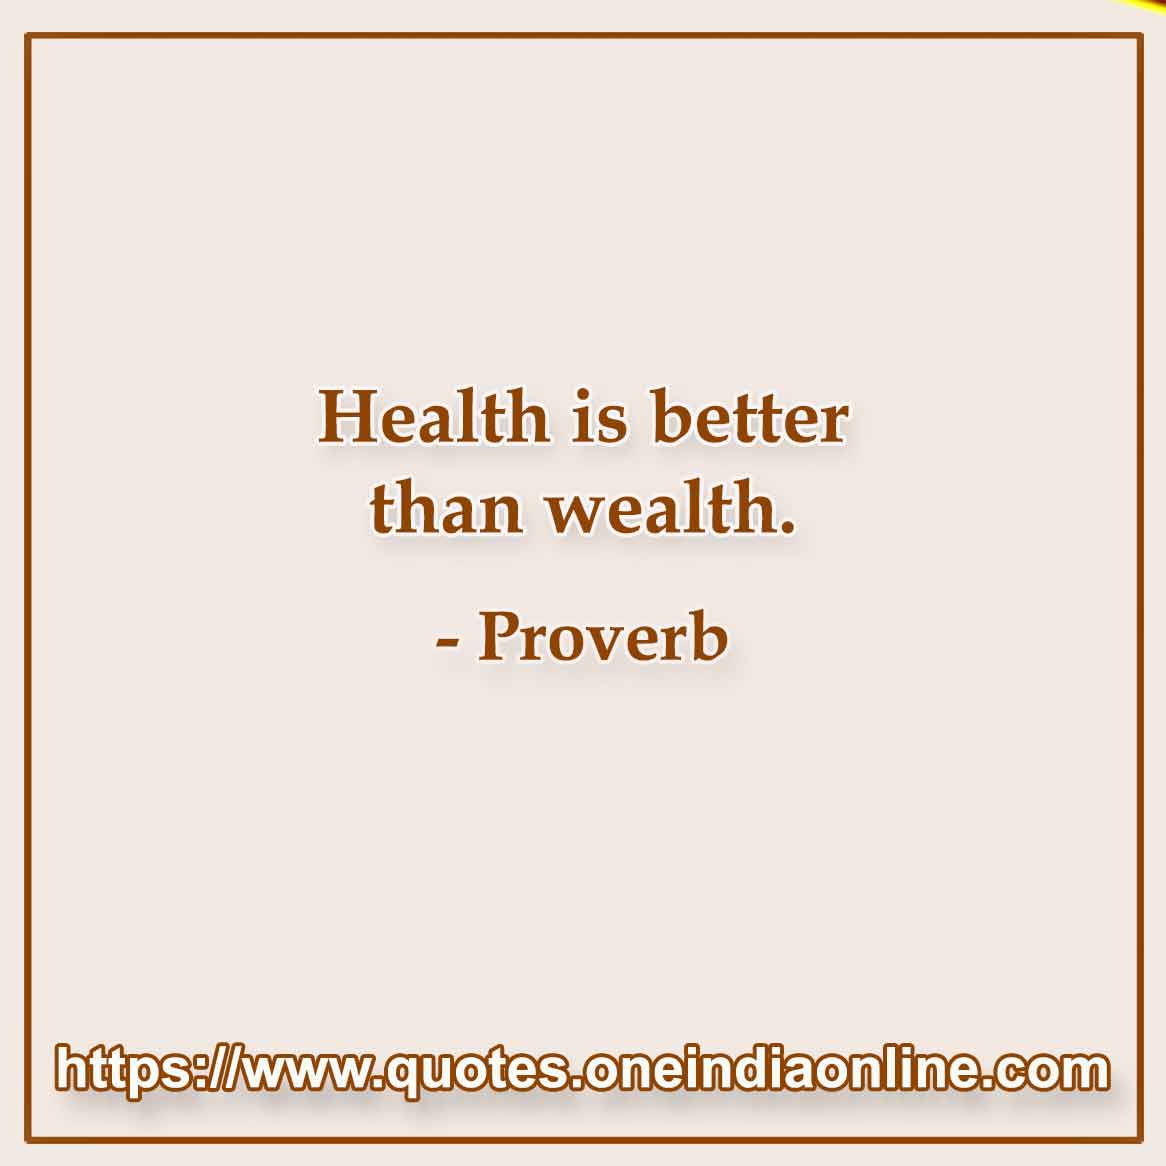 Health is better than wealth.

